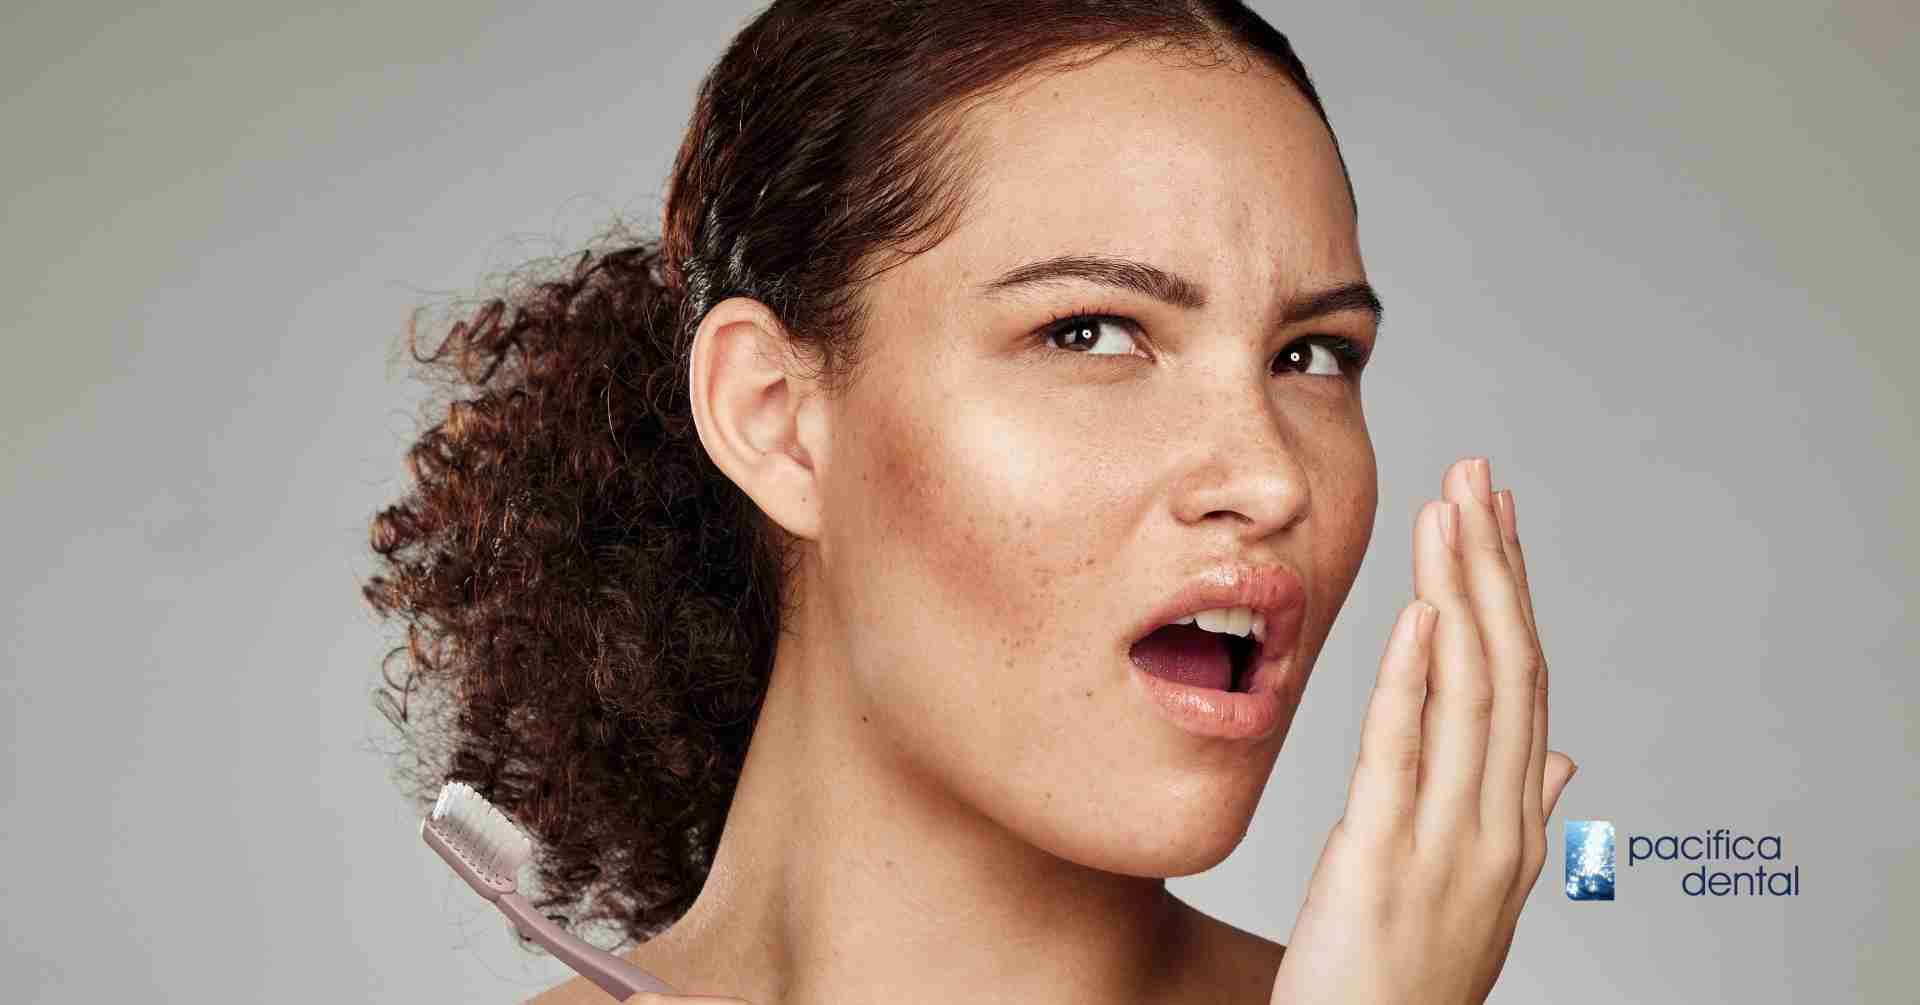 5 Tips to Permanently Get Rid of Bad Breath